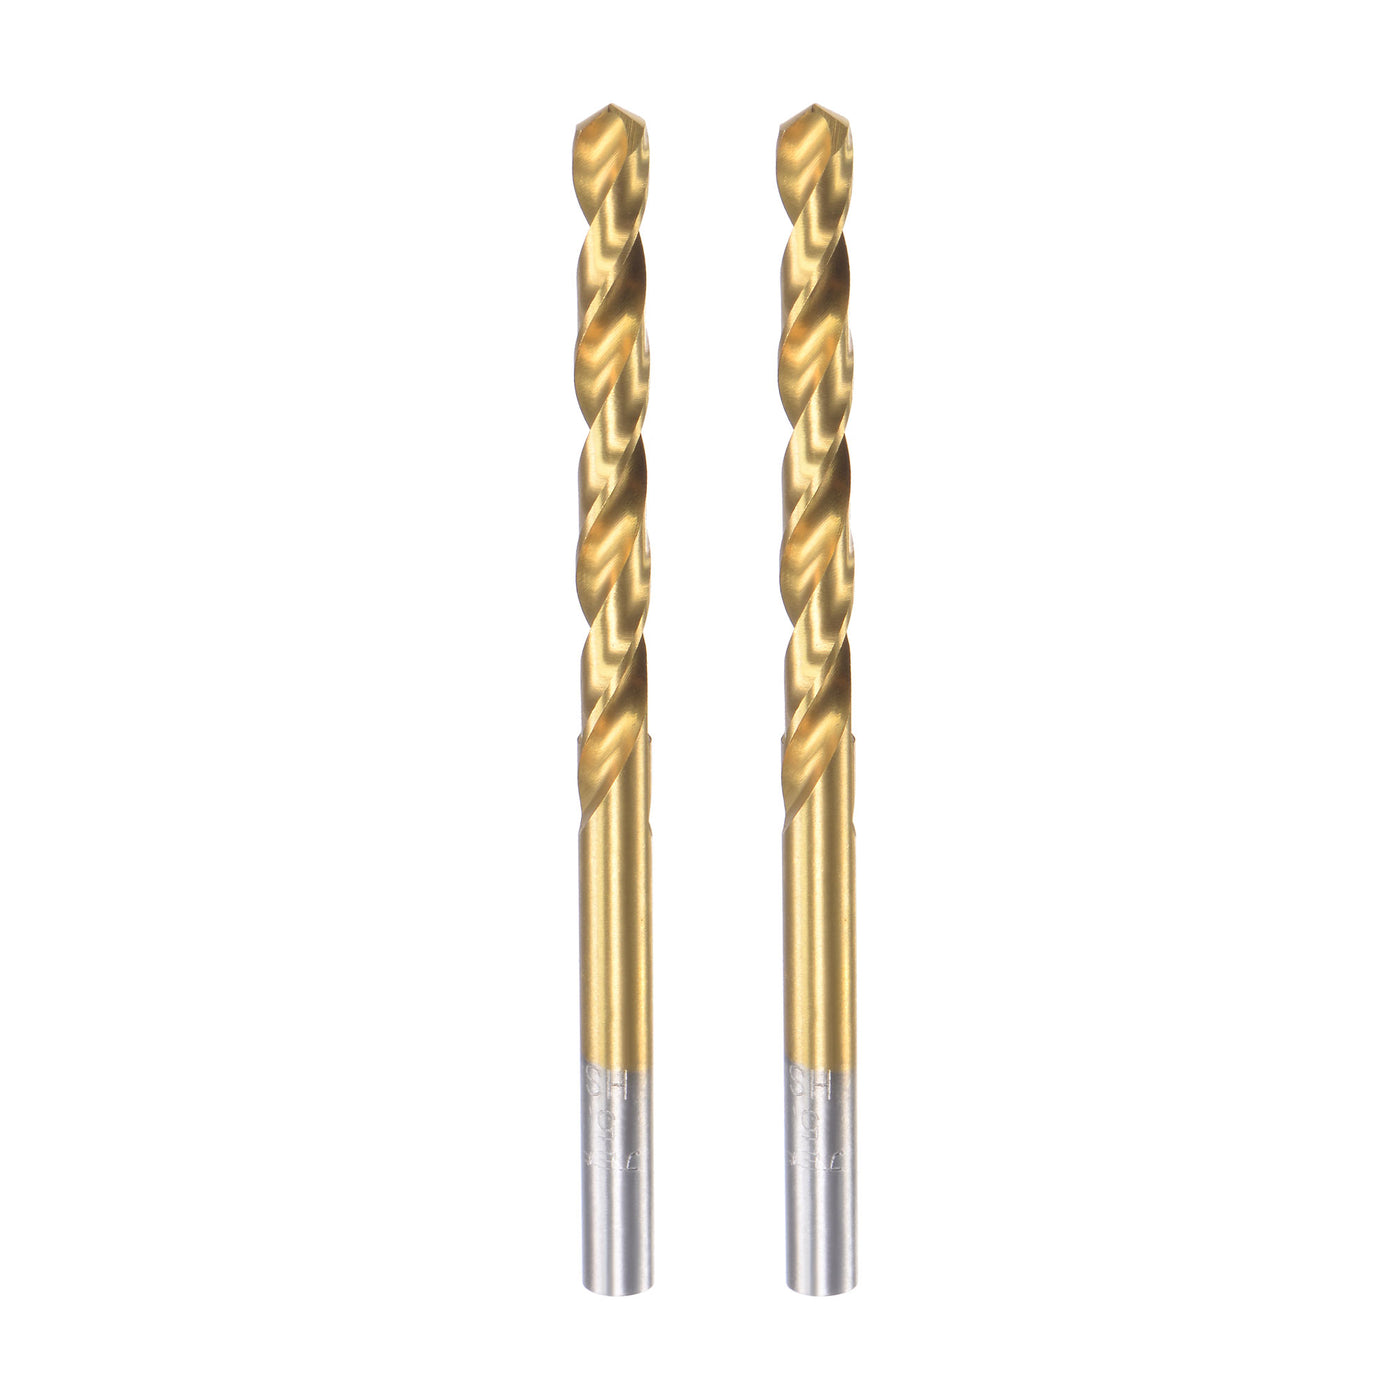 uxcell Uxcell High Speed Steel Twist Drill Bit 5.1mm Fully Ground Titanium Coated 2 Pcs